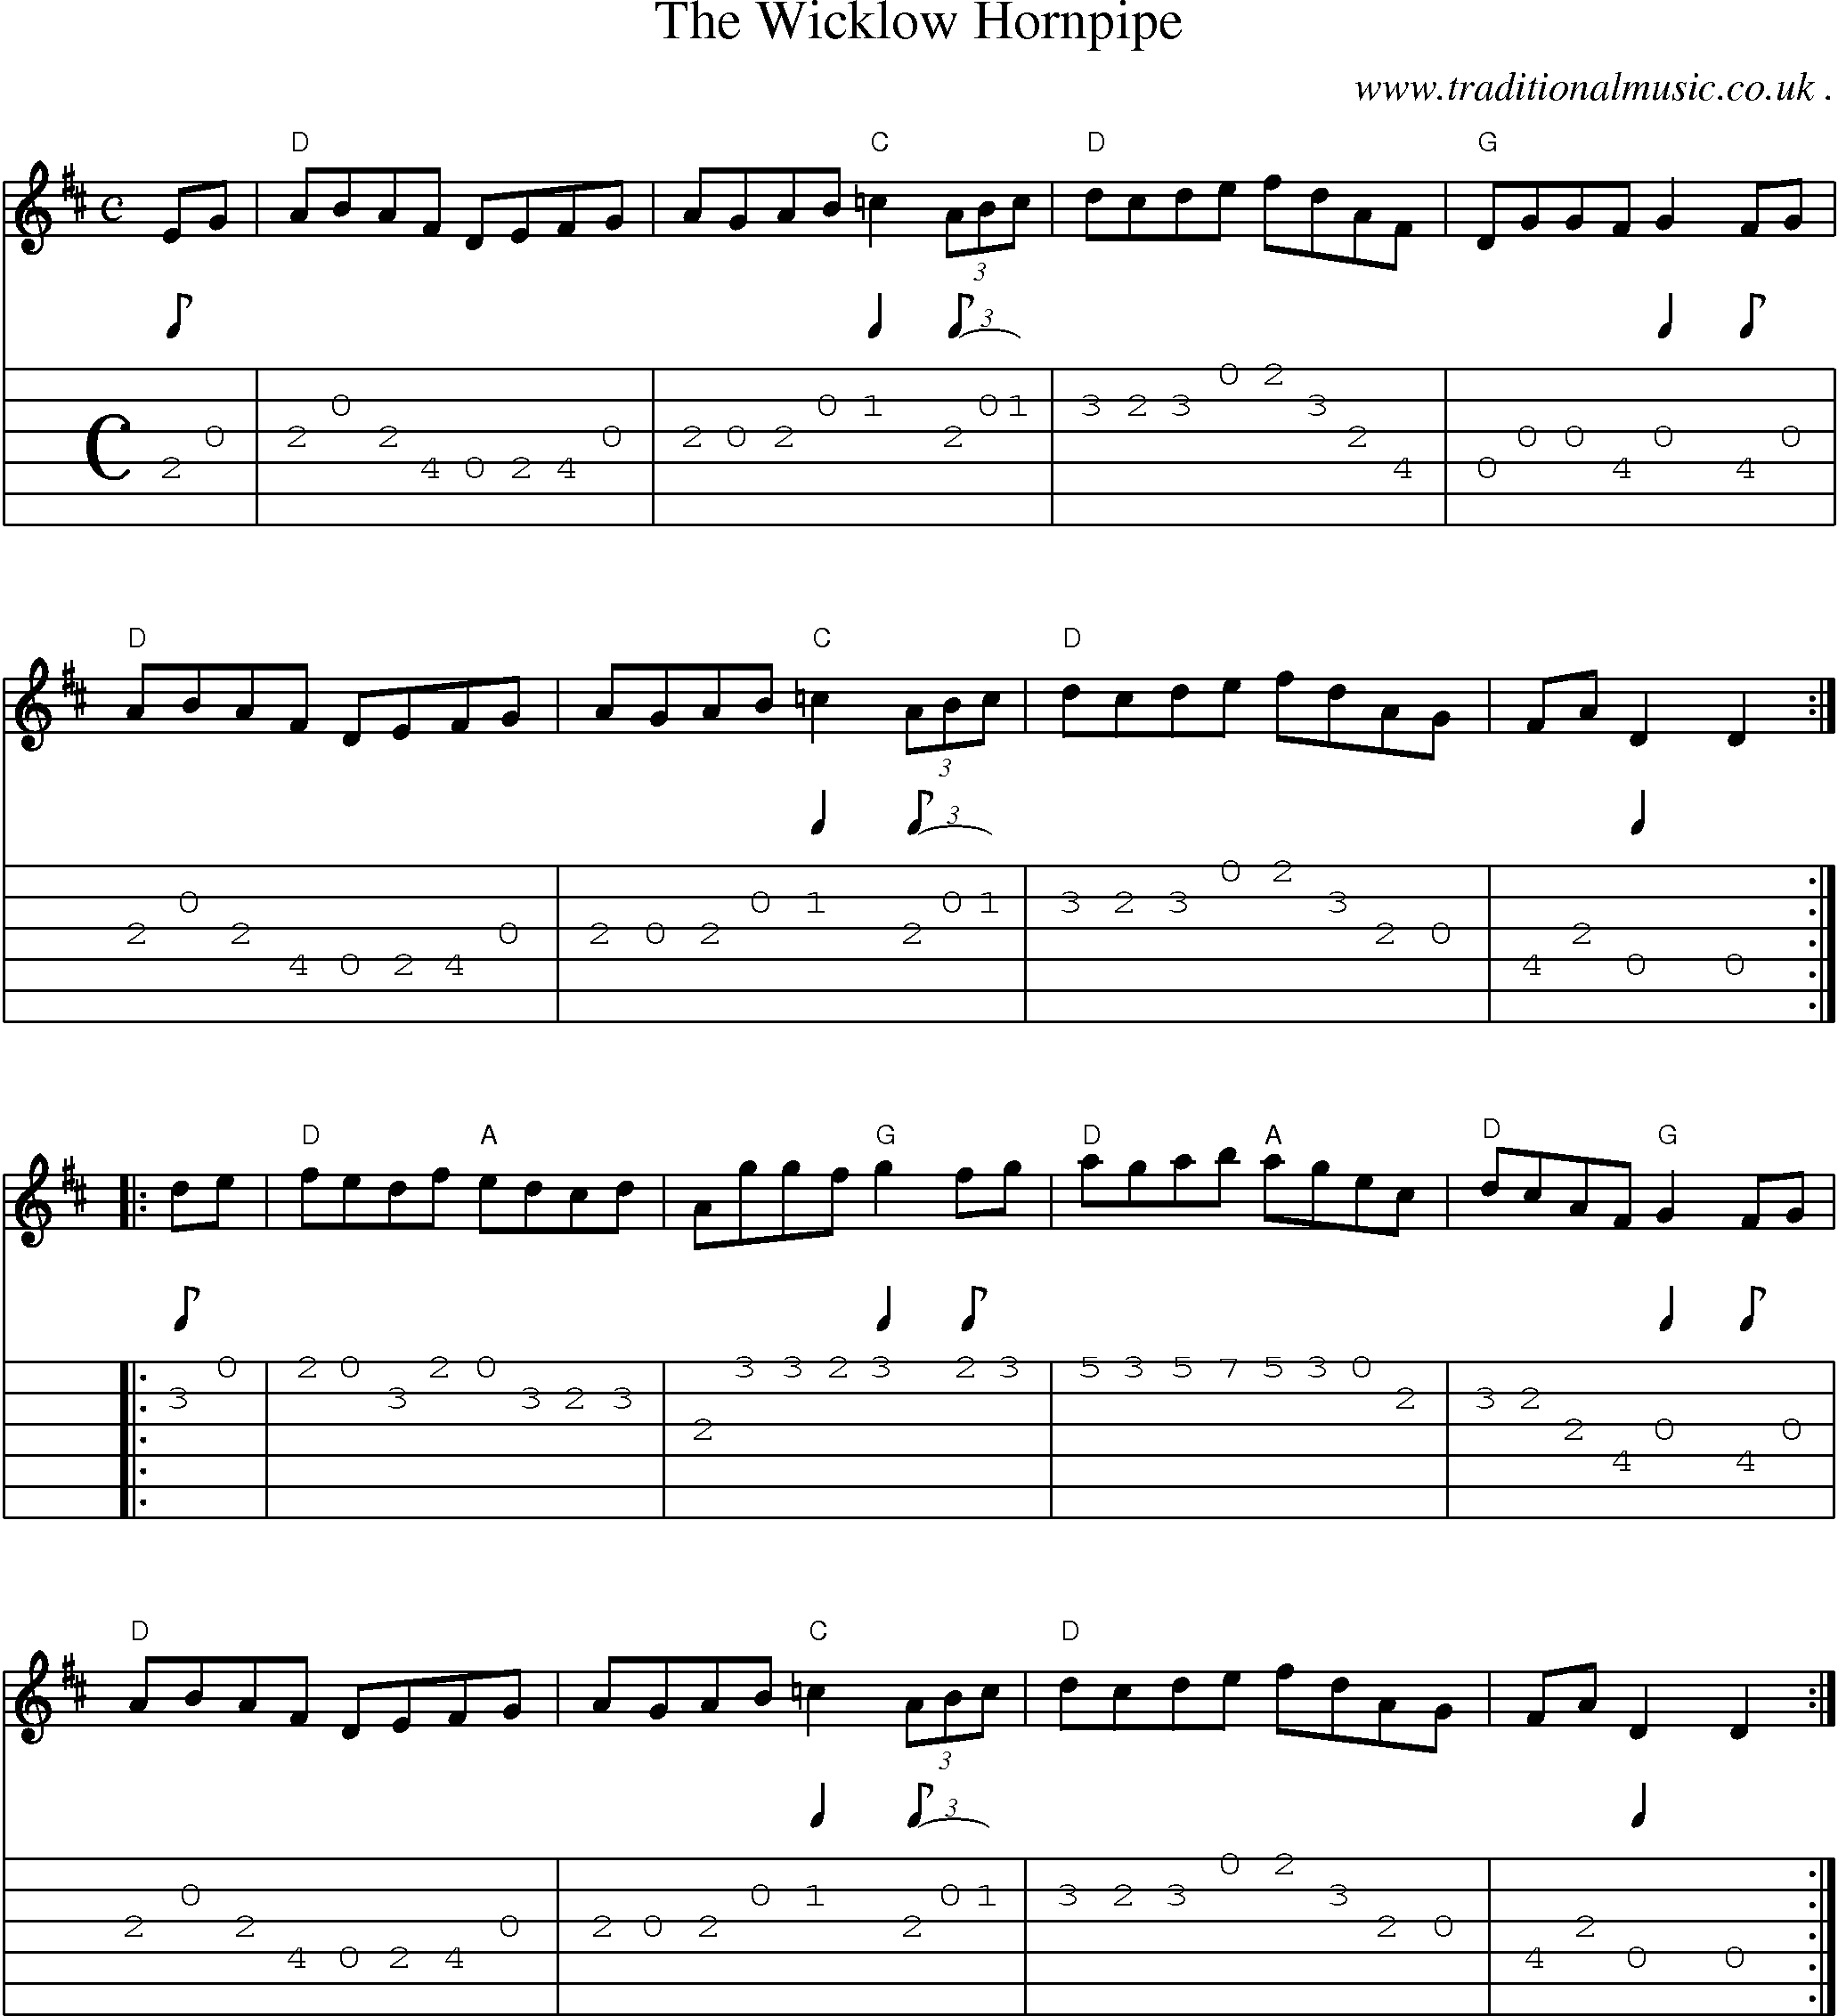 Music Score and Guitar Tabs for The Wicklow Hornpipe